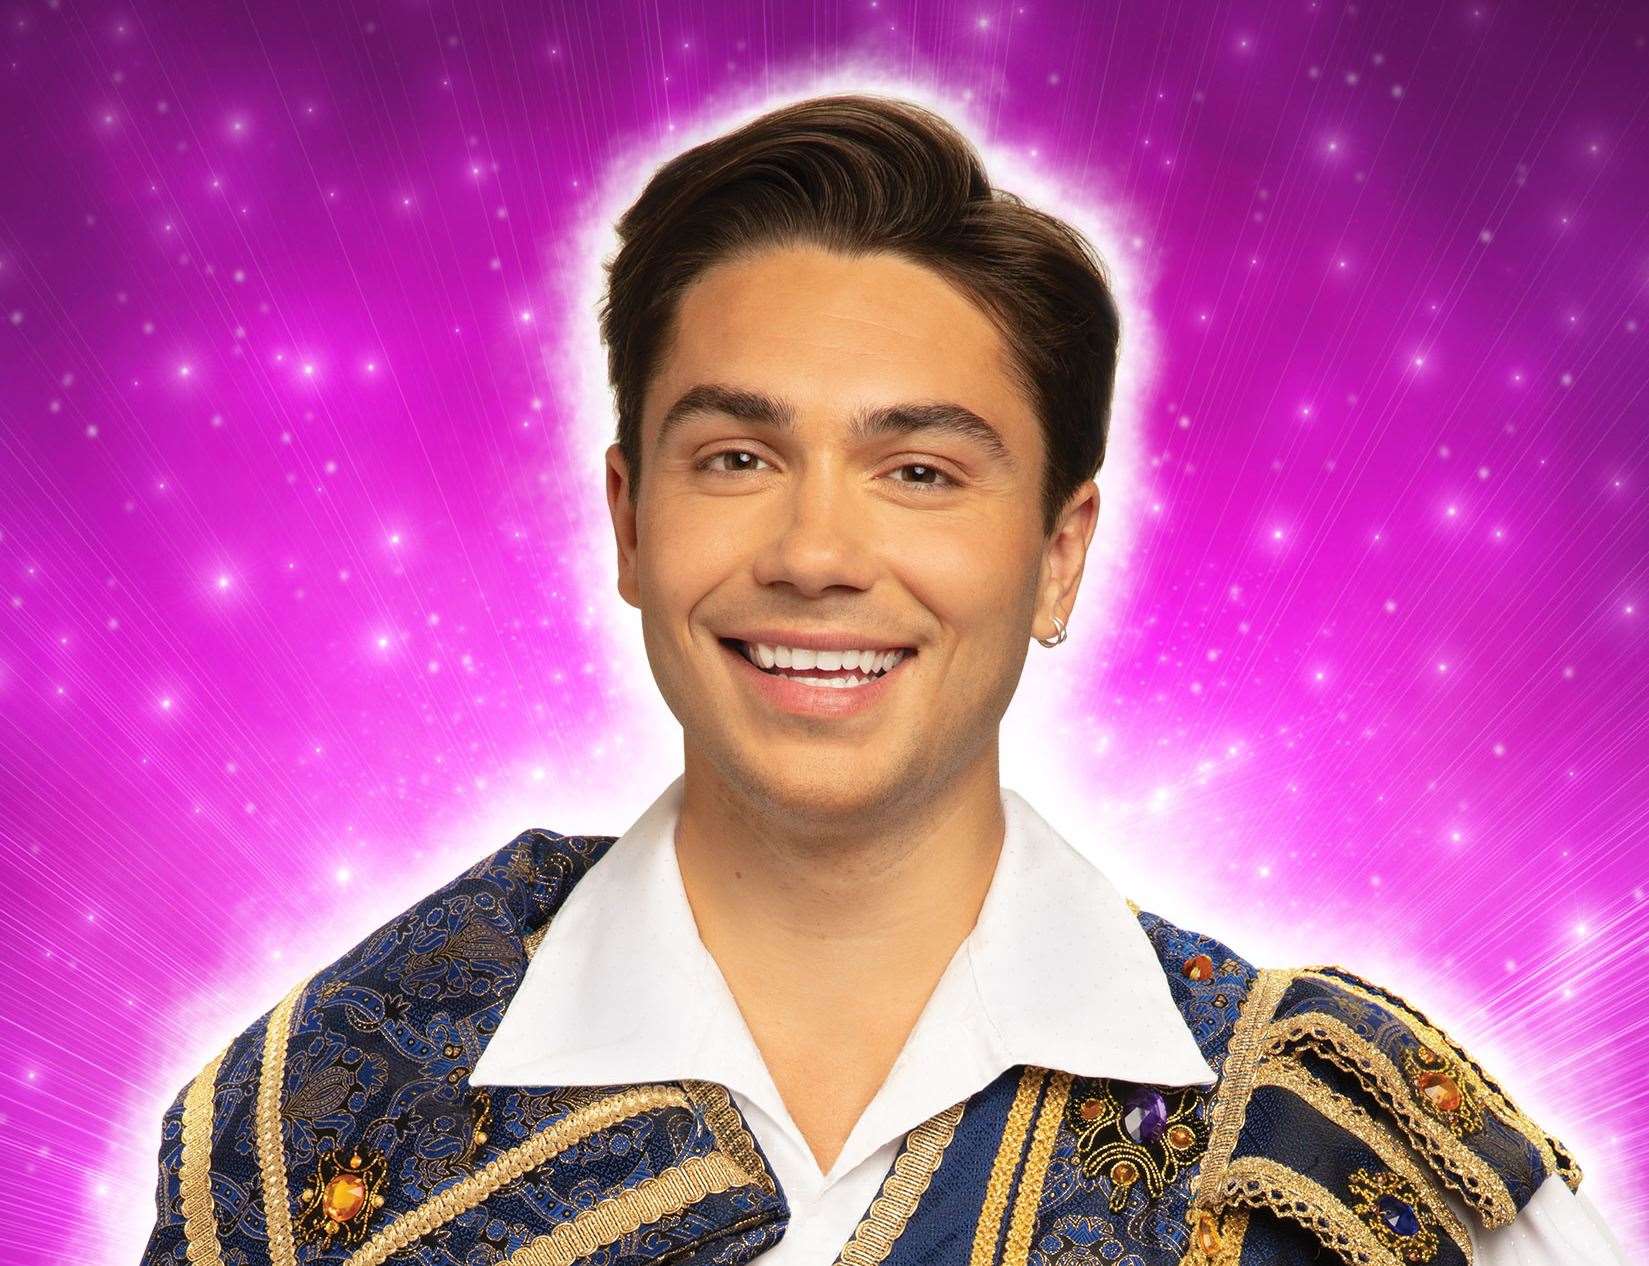 Union J singer and I'm a Celebrity runner-up George Shelley makes his pantomime debut as Prince Charming